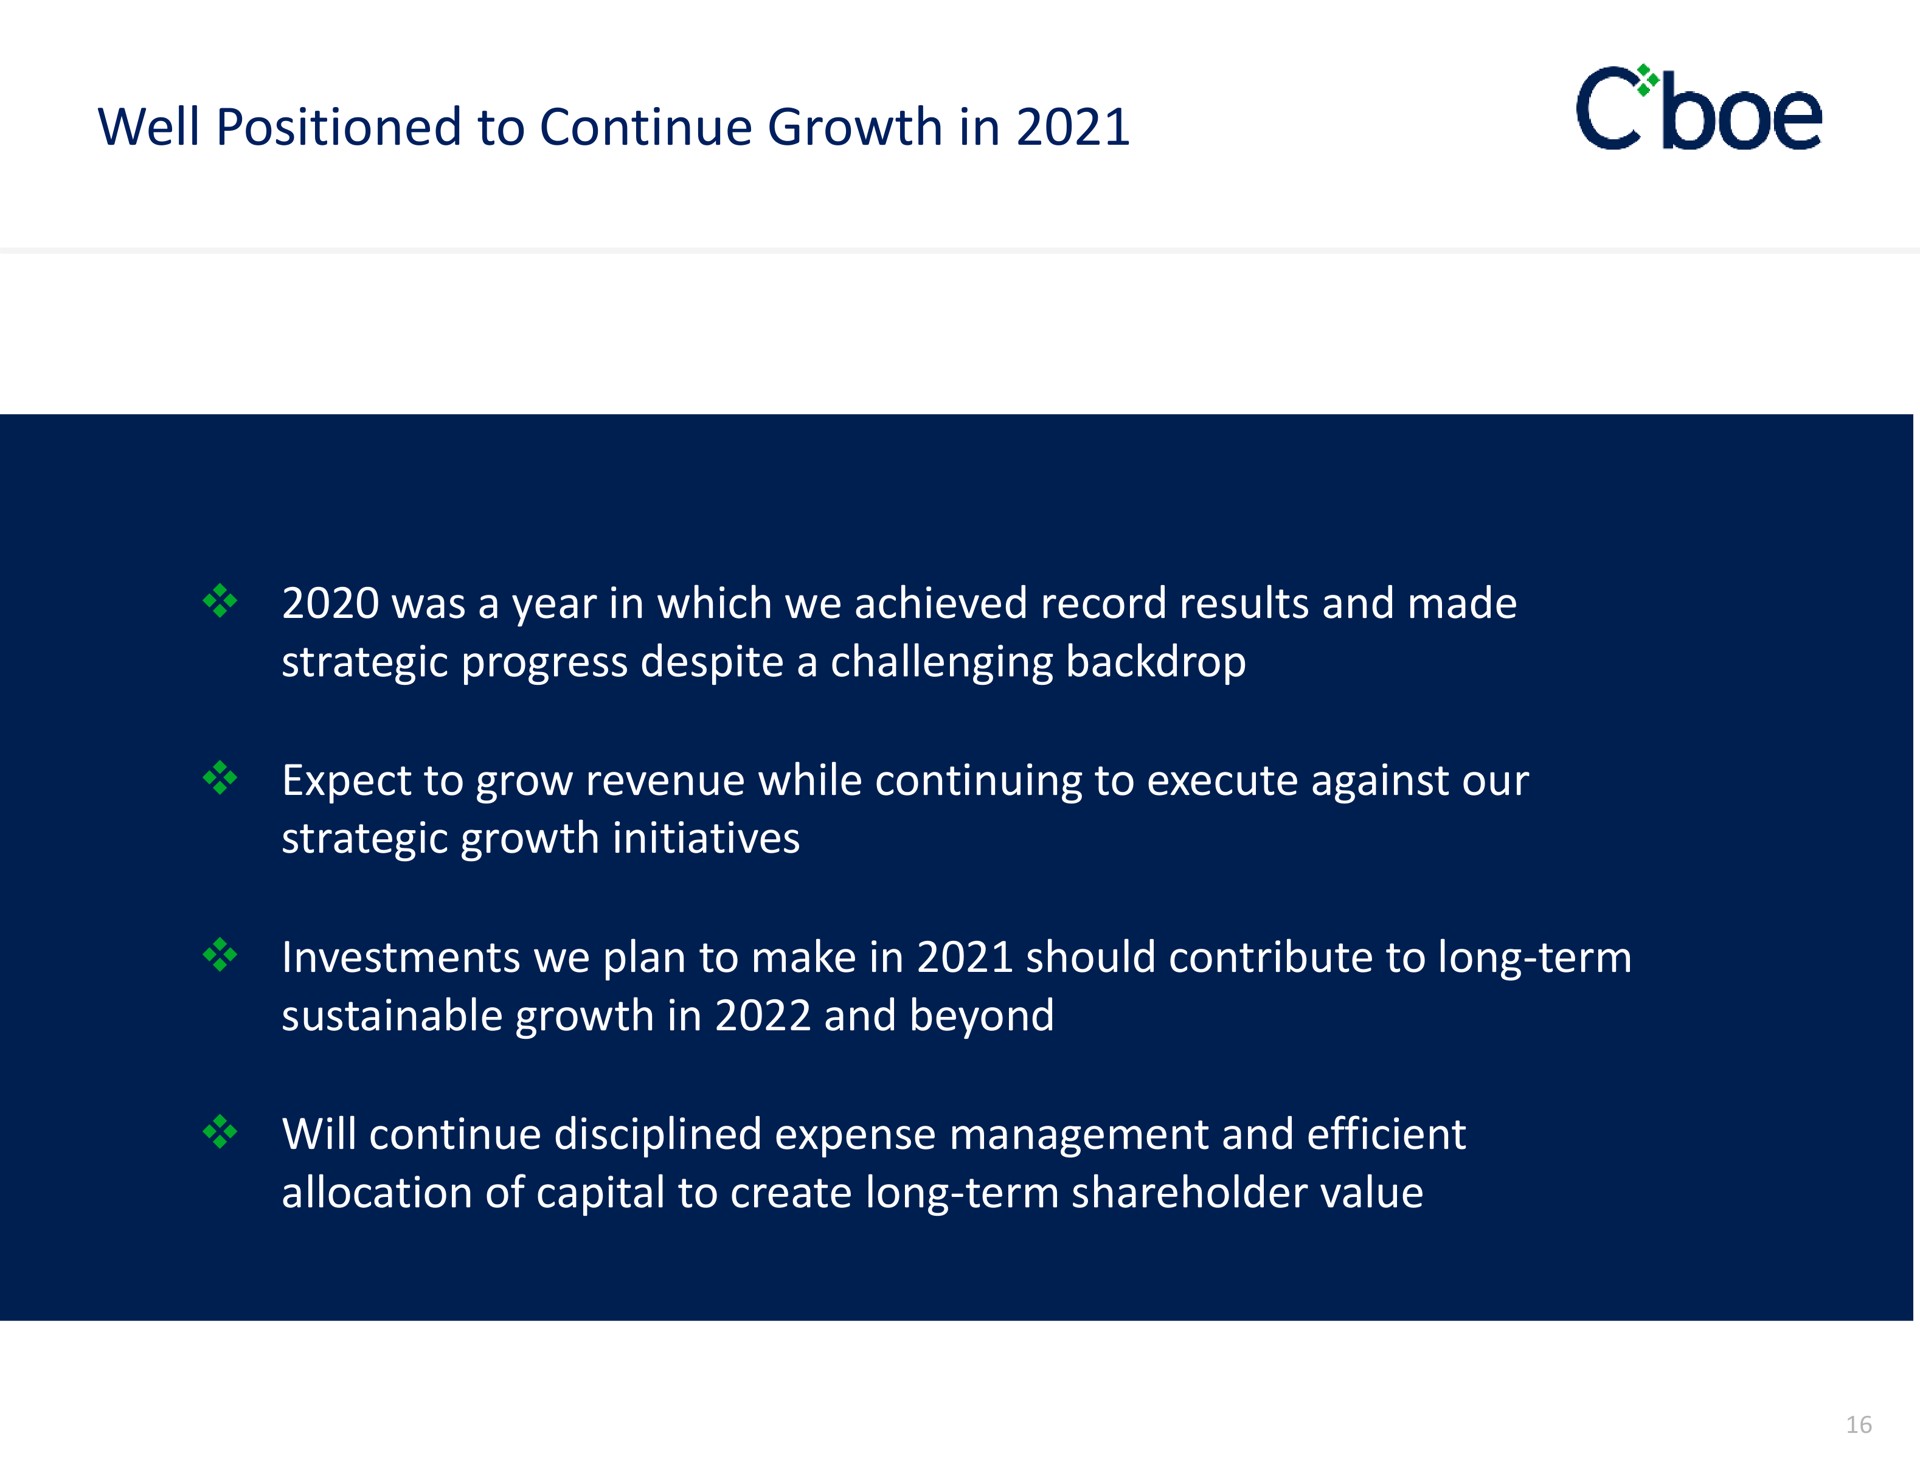 well positioned to continue growth in was a year in which we achieved record results and made strategic progress despite a challenging backdrop expect to grow revenue while continuing to execute against our strategic growth initiatives investments we plan to make in should contribute to long term sustainable growth in and beyond will continue disciplined expense management and efficient allocation of capital to create long term shareholder value | Cboe